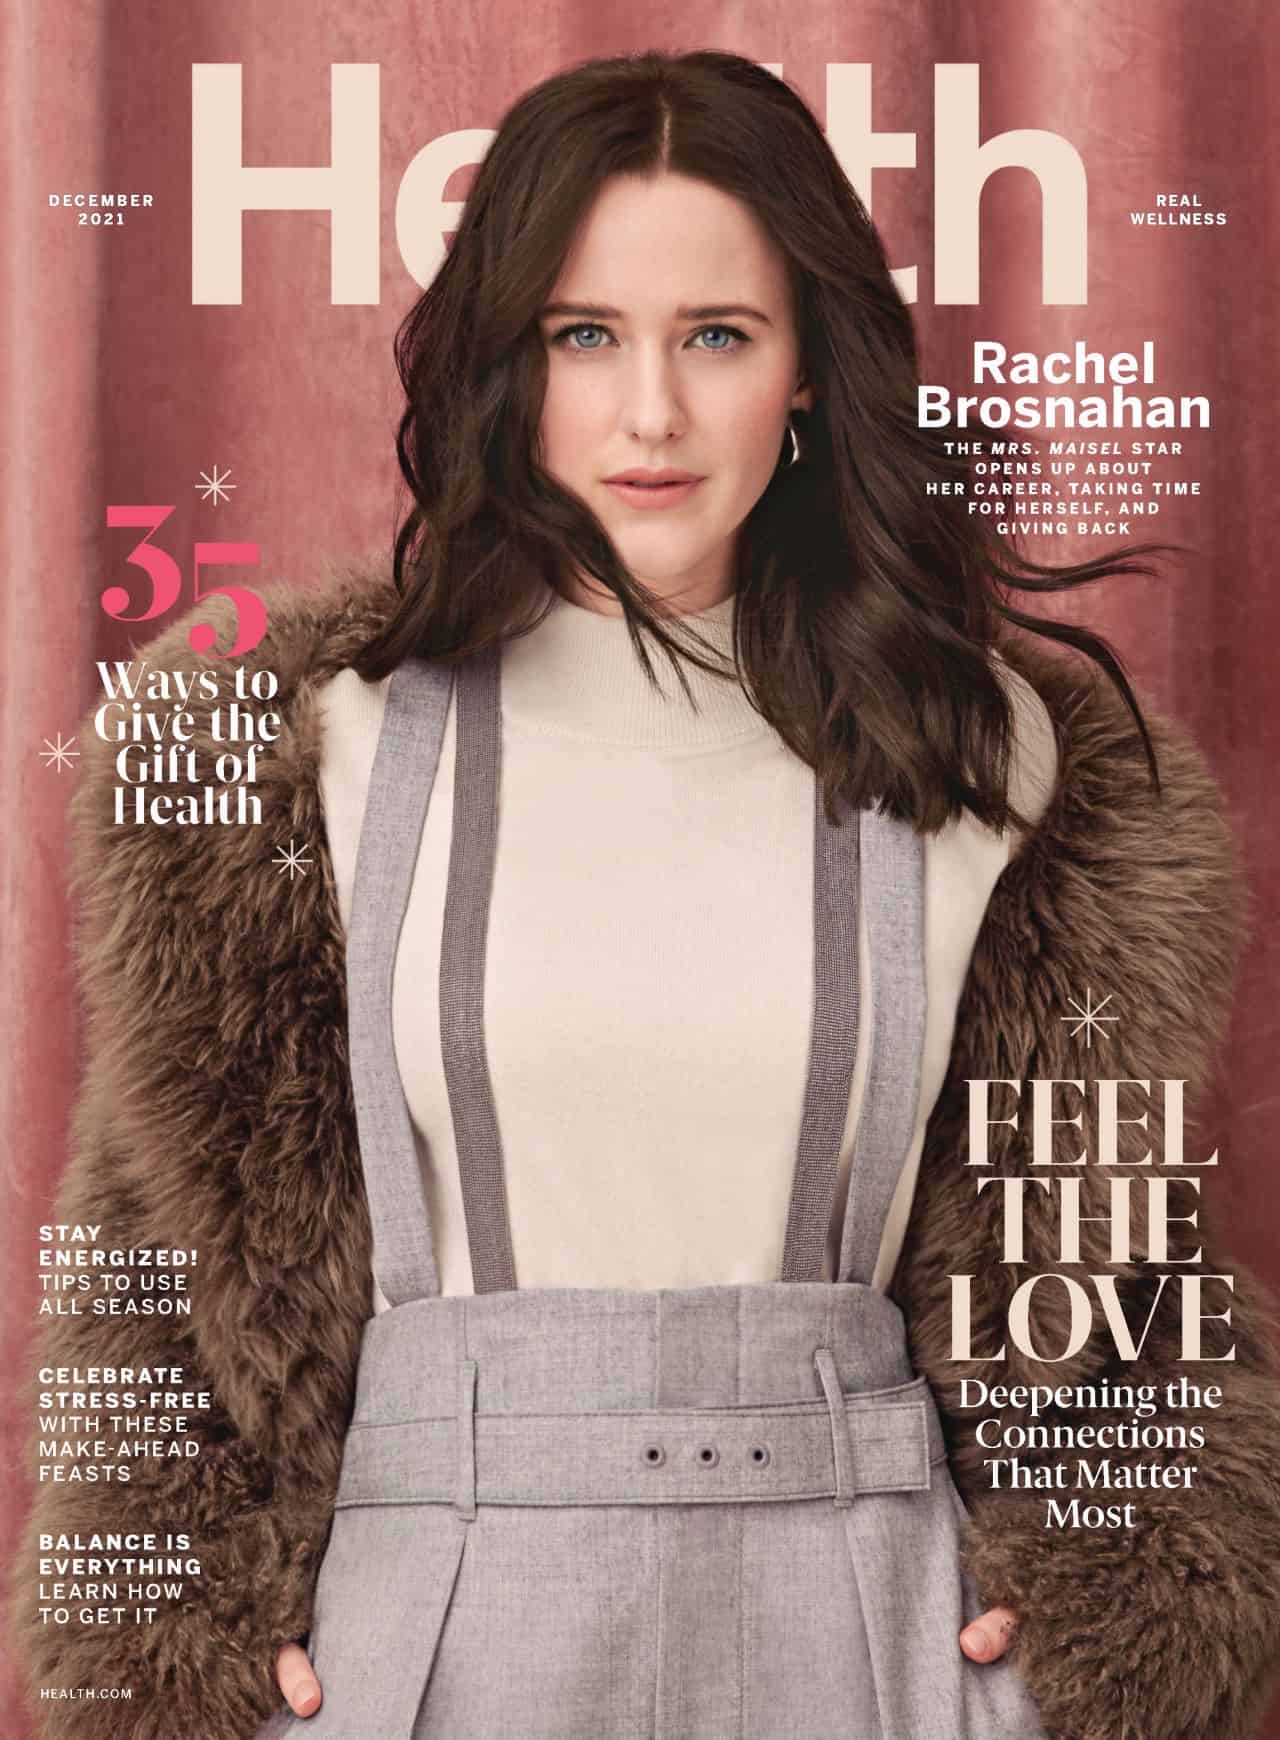 Rachel Brosnahan Covers the December 2021 Issue of Health Magazine